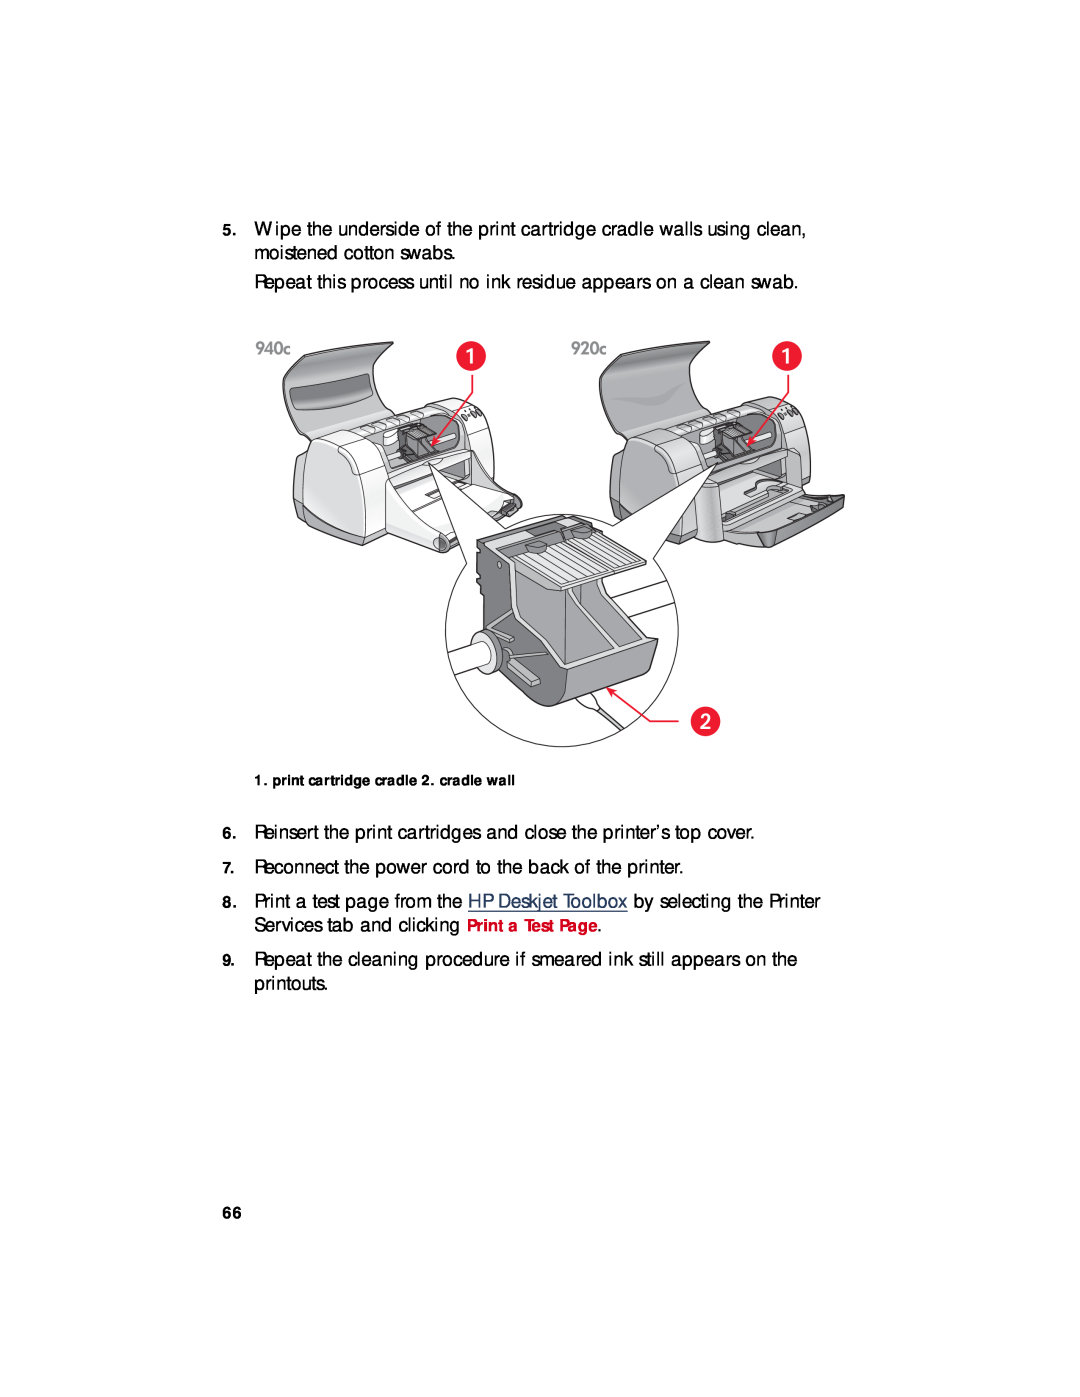 HP 940c, 920c, 948c manual Repeat this process until no ink residue appears on a clean swab 